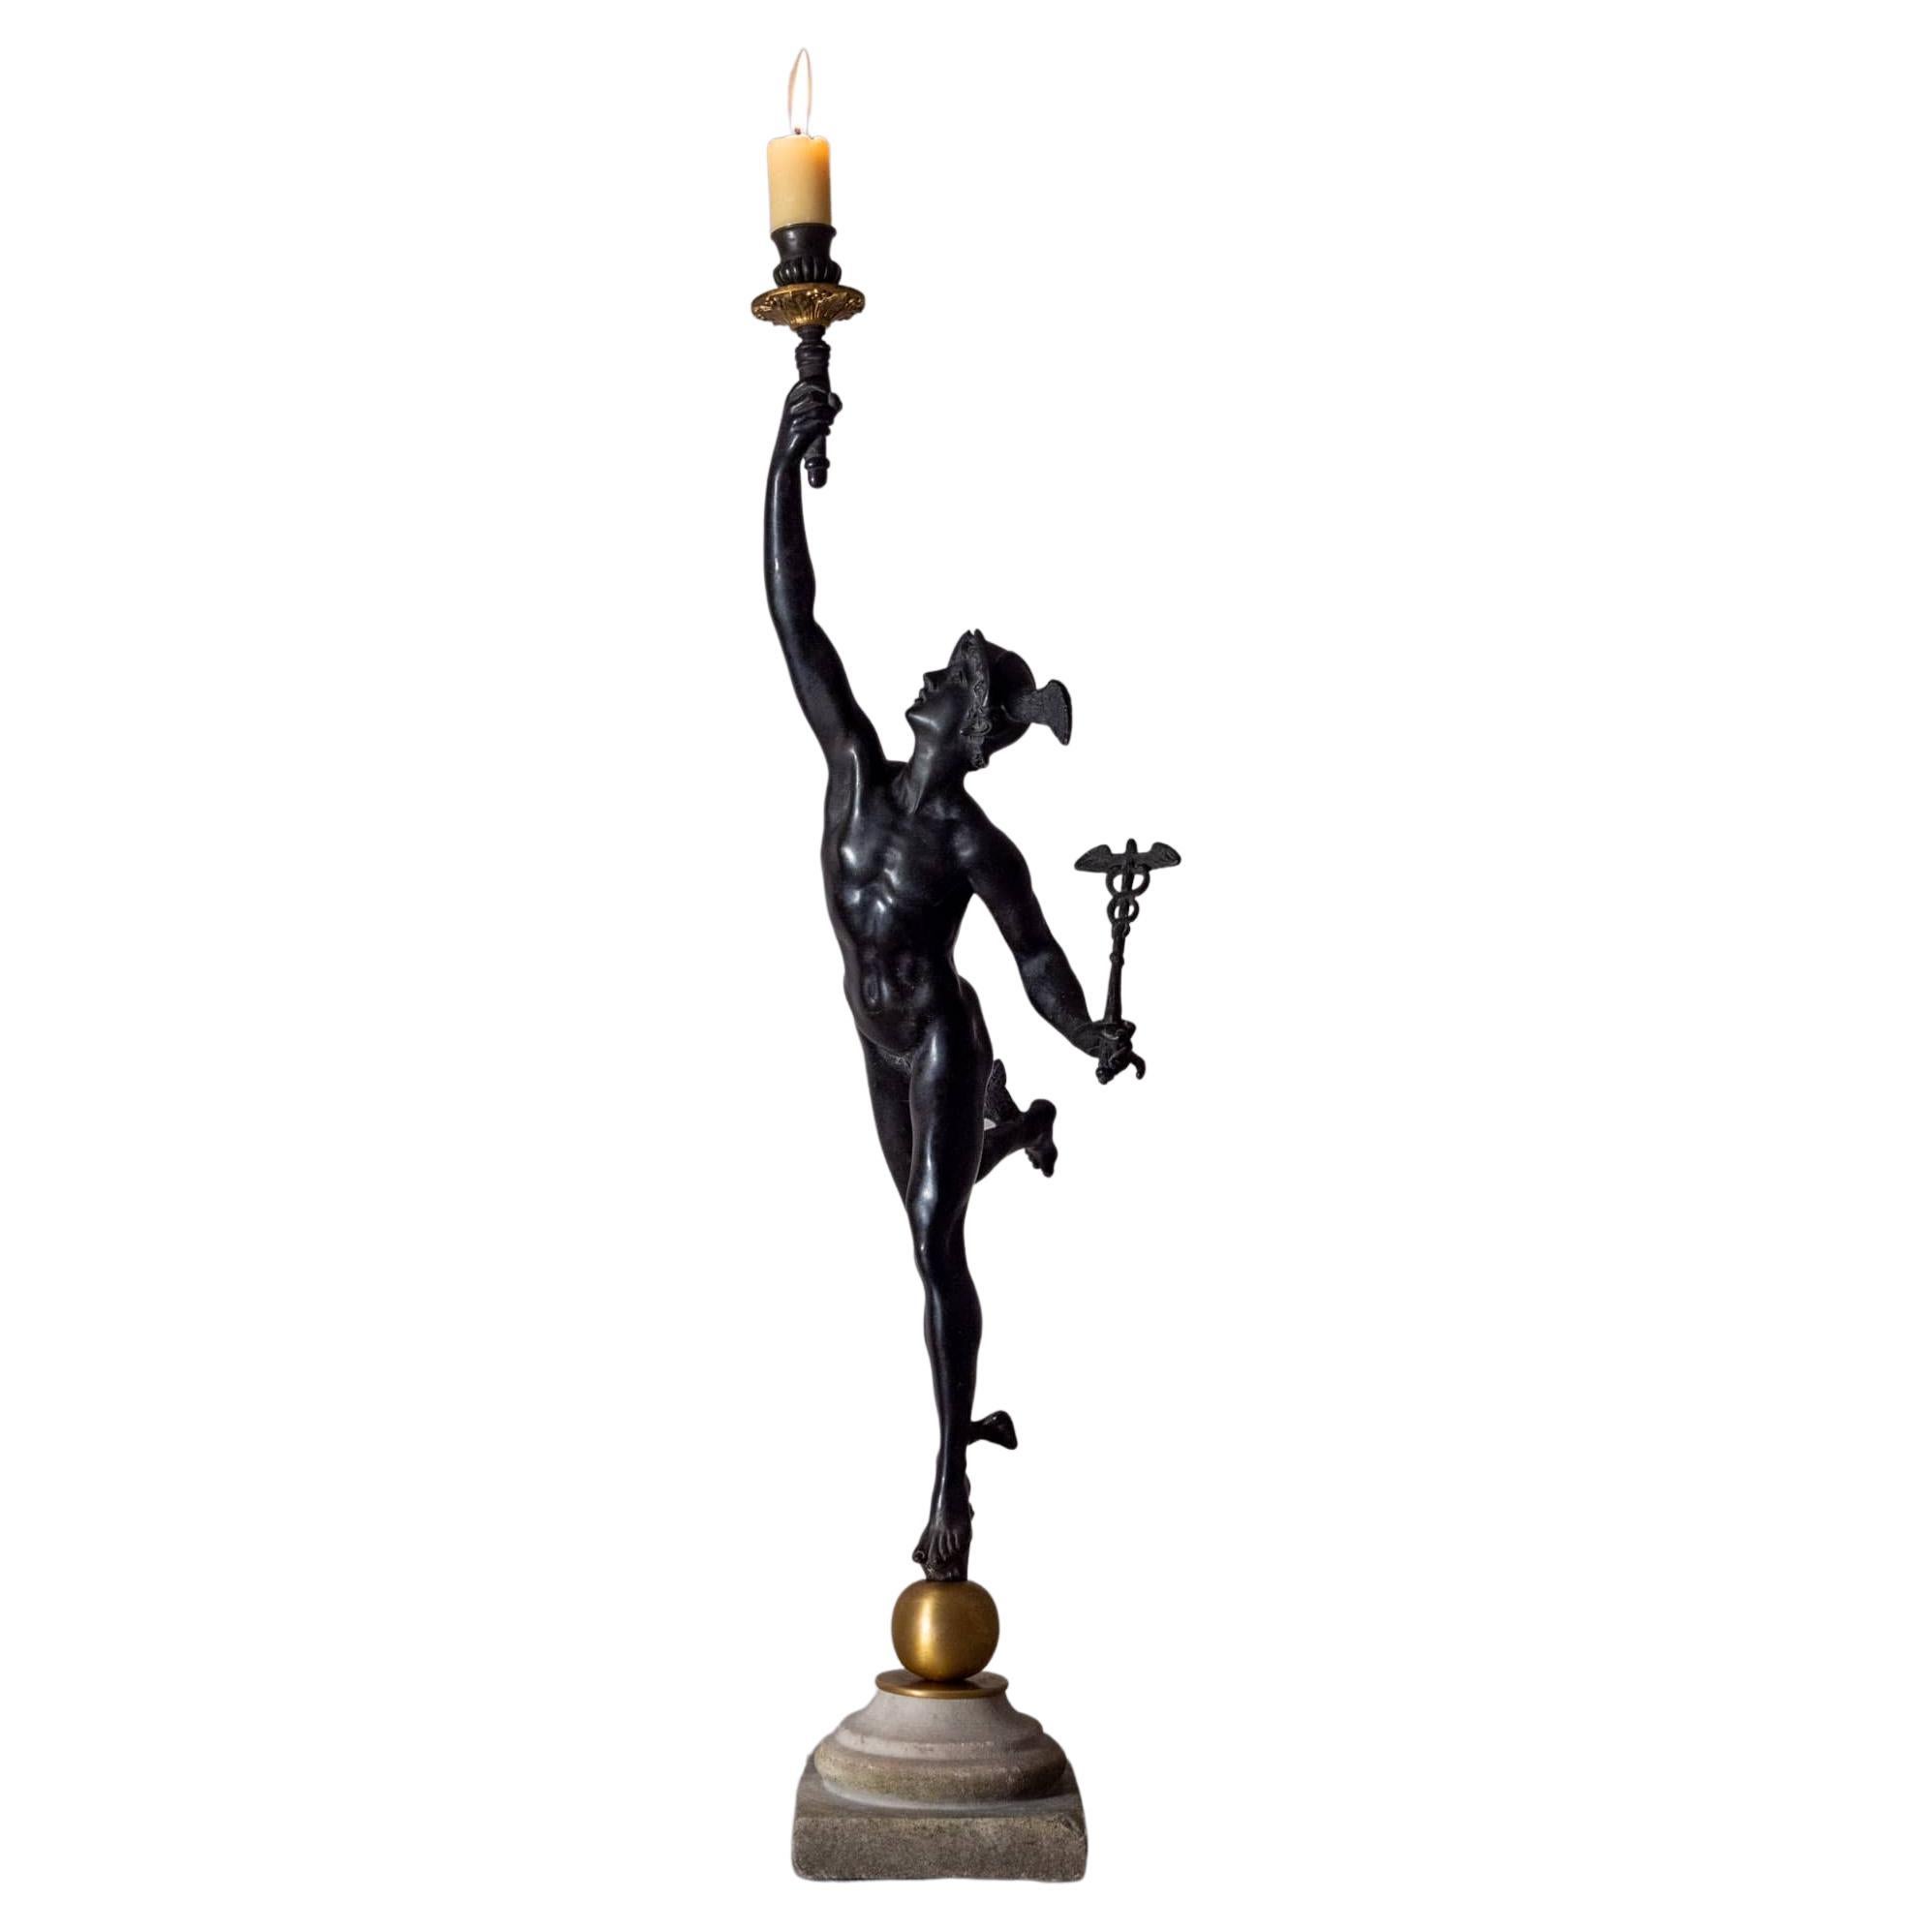 Hermes After Giambologna, 19th Century